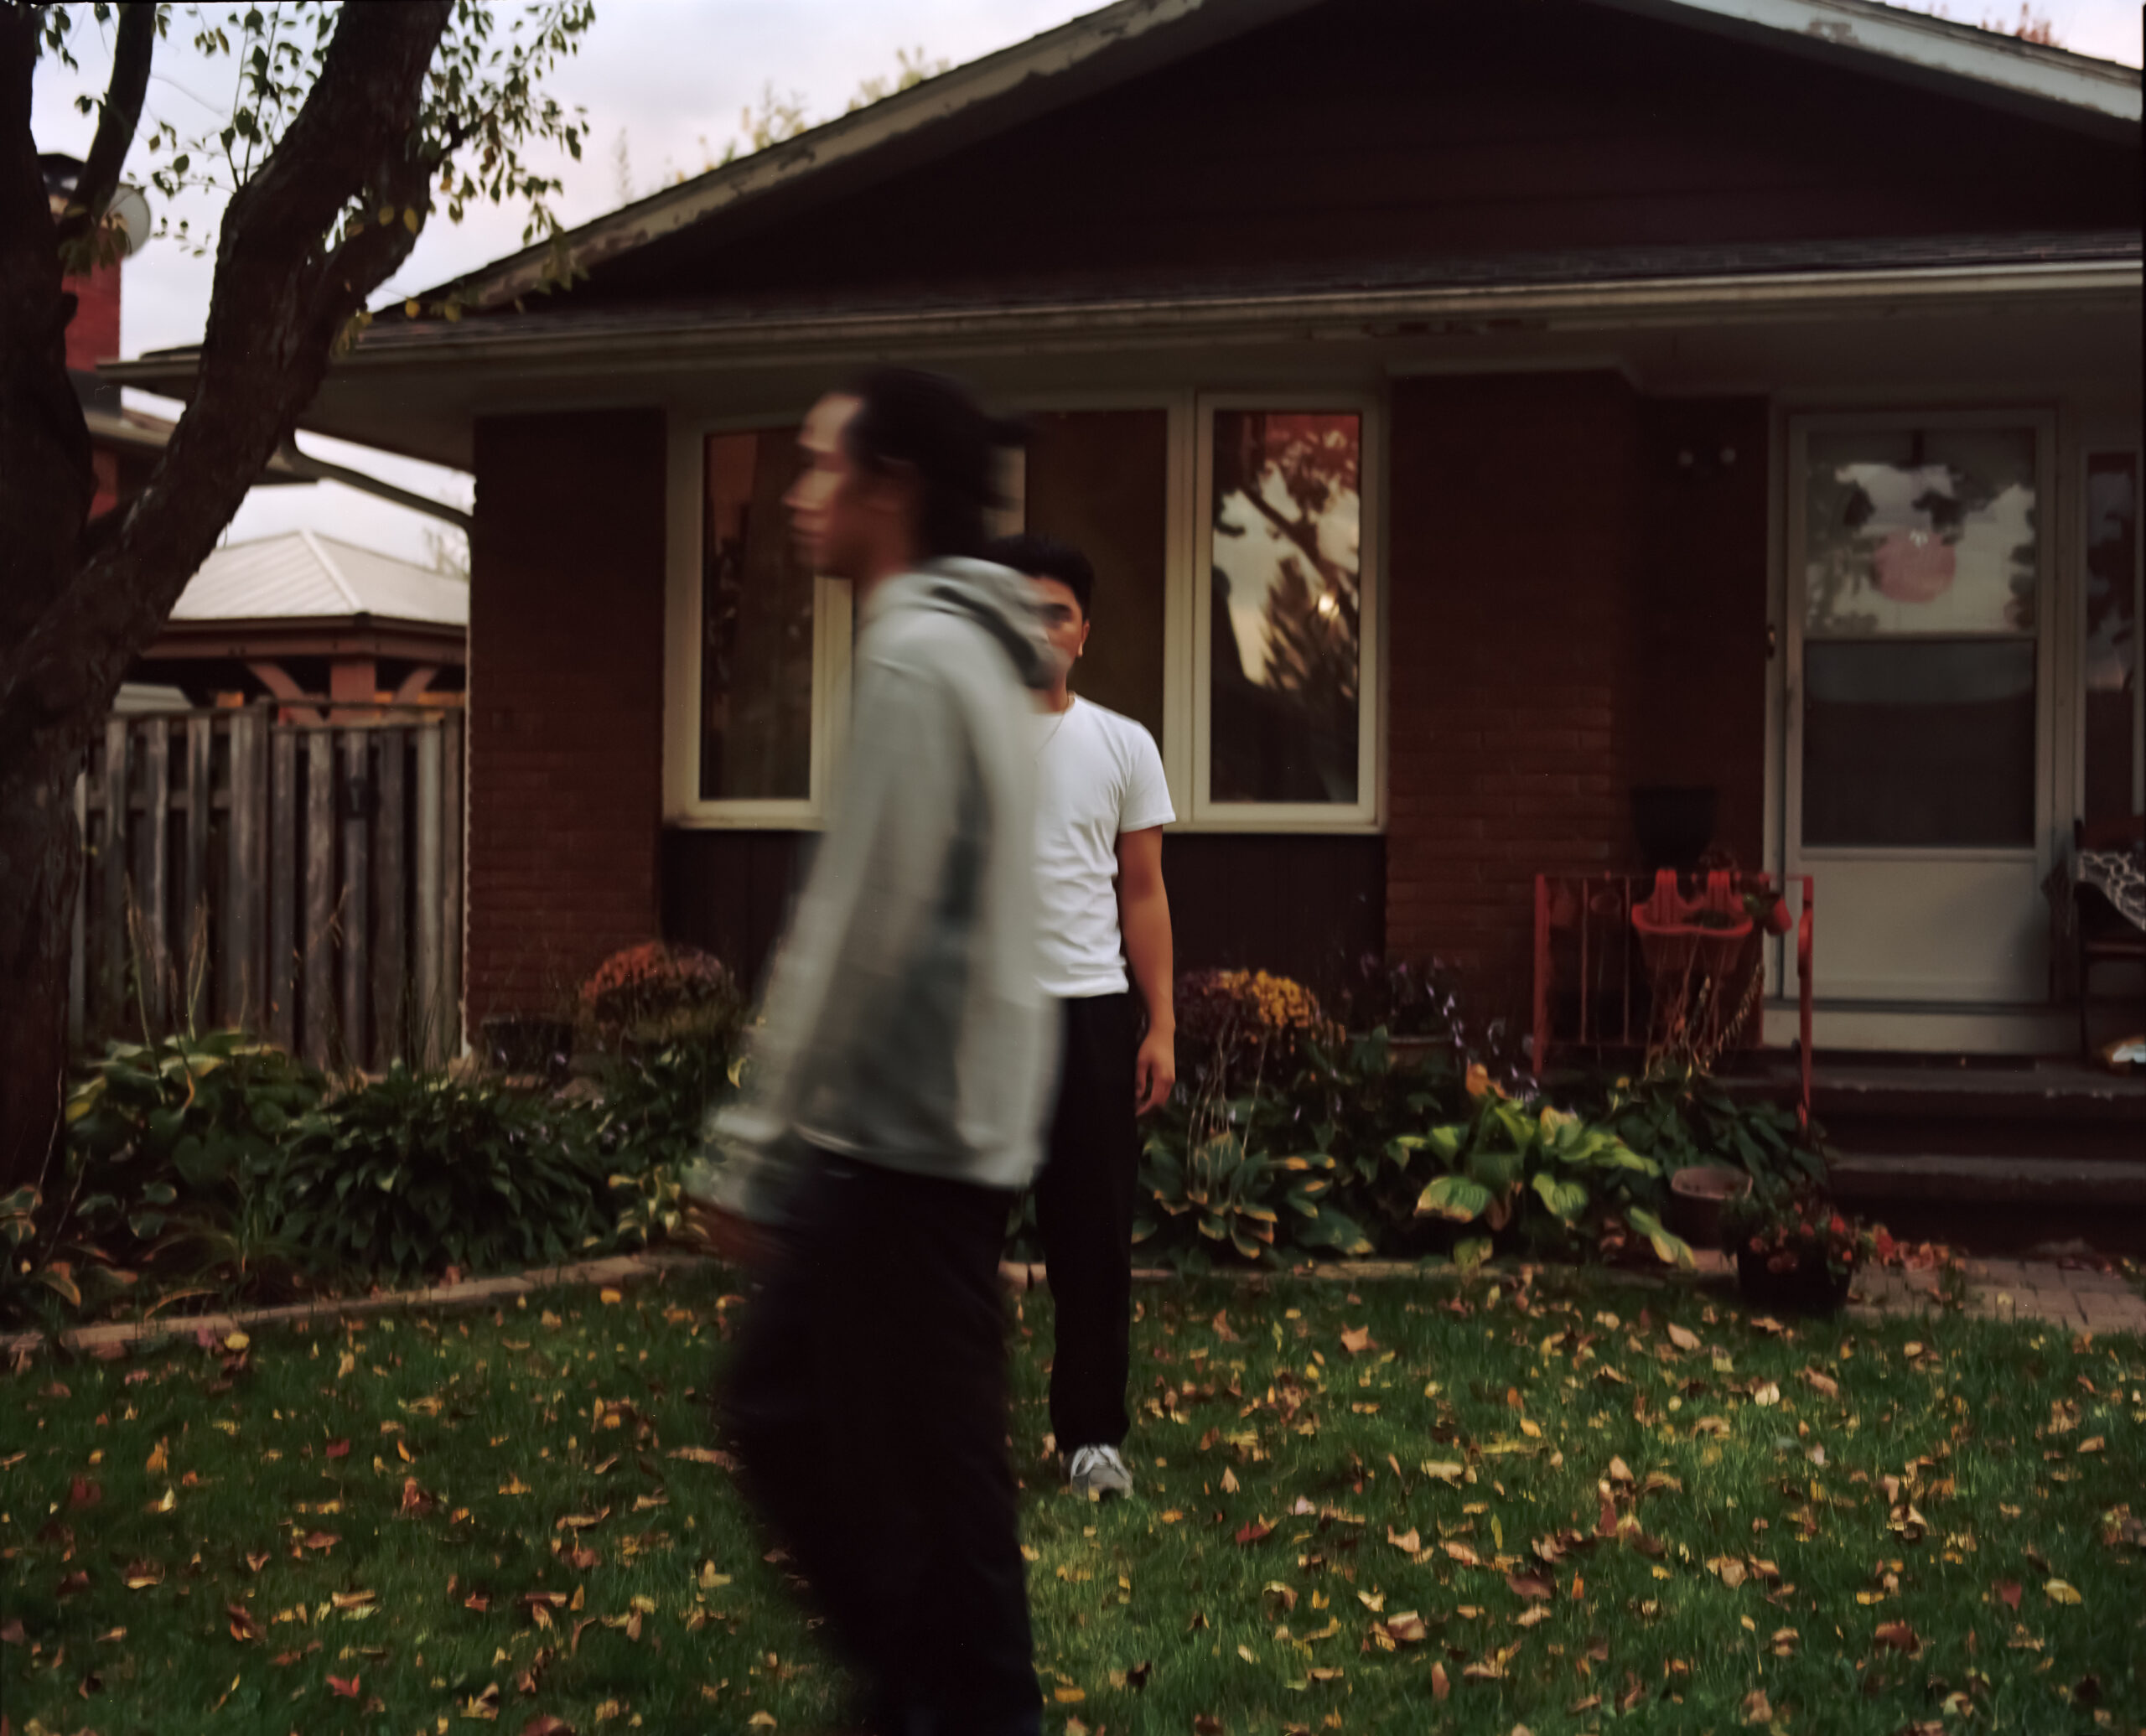 In front of a house A blurred person walks by a man looking into the camera